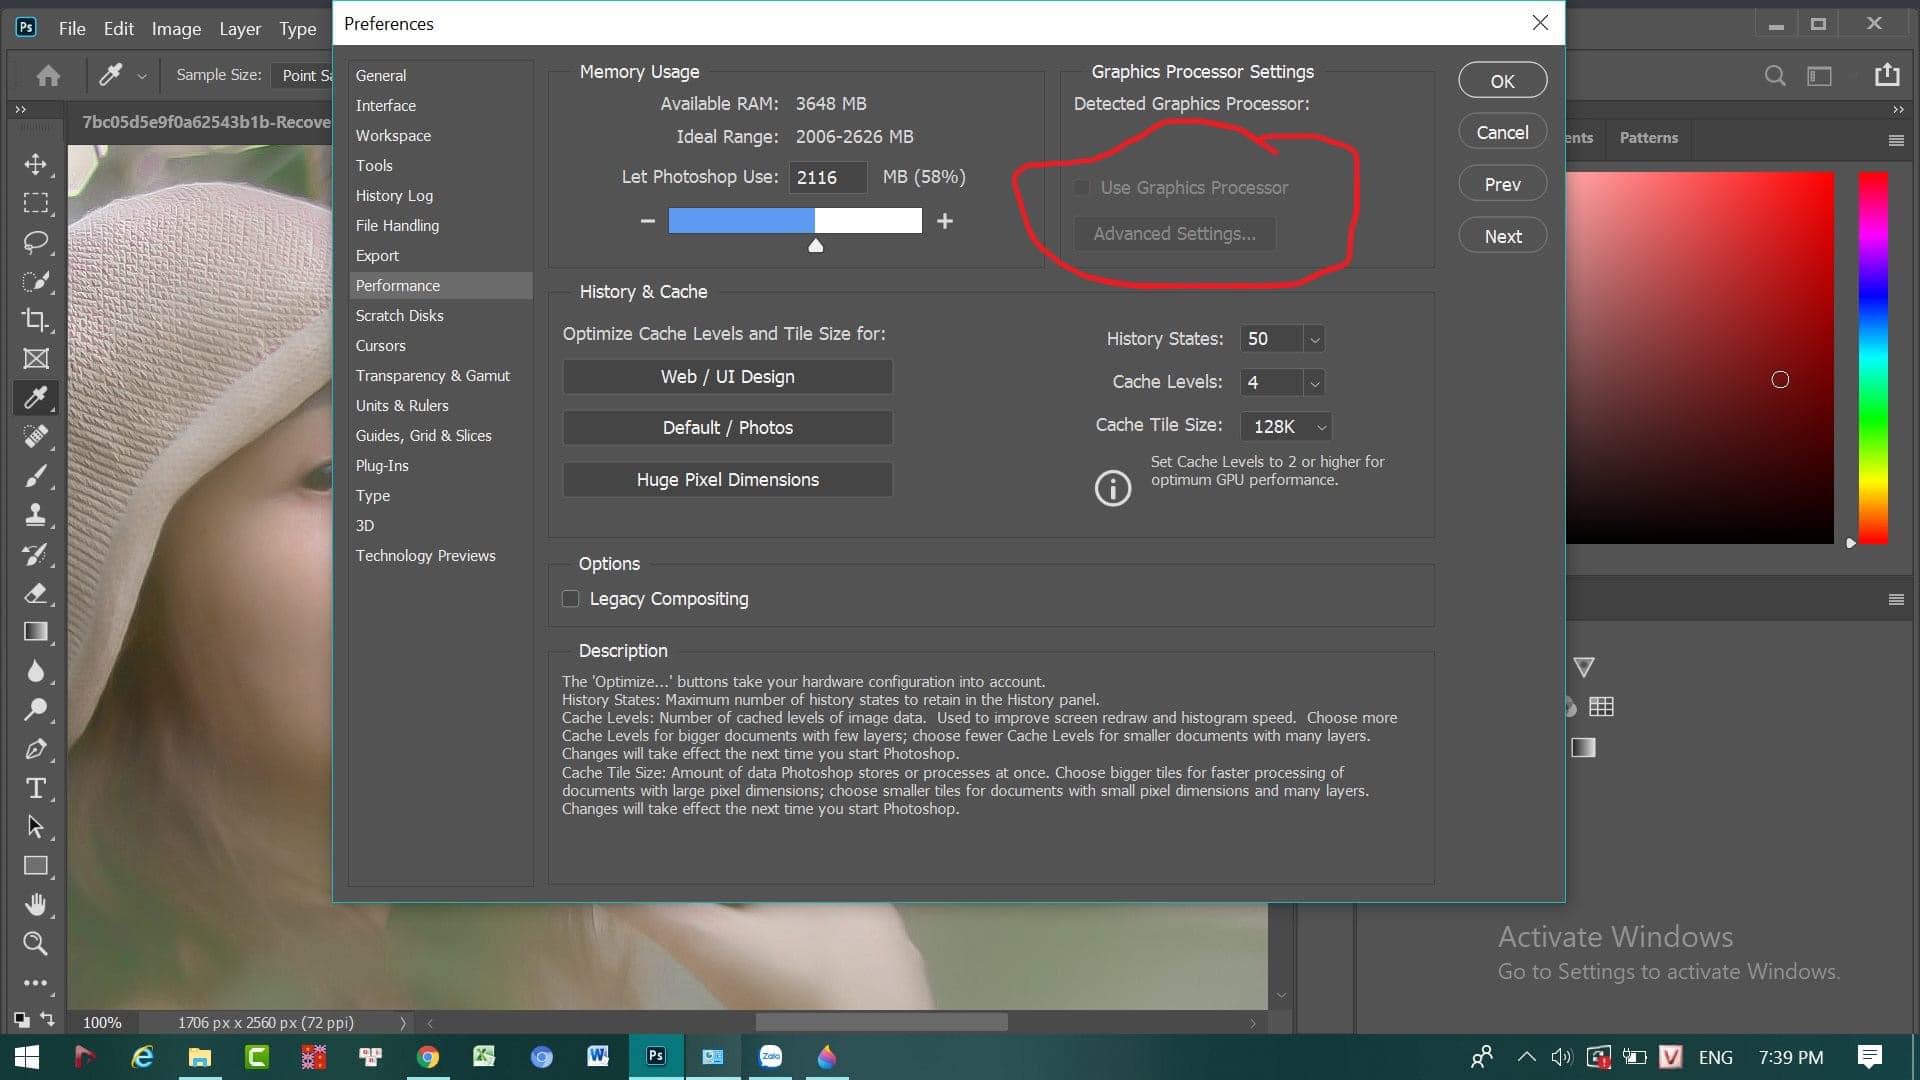 How to enable graphics processor in photoshop?